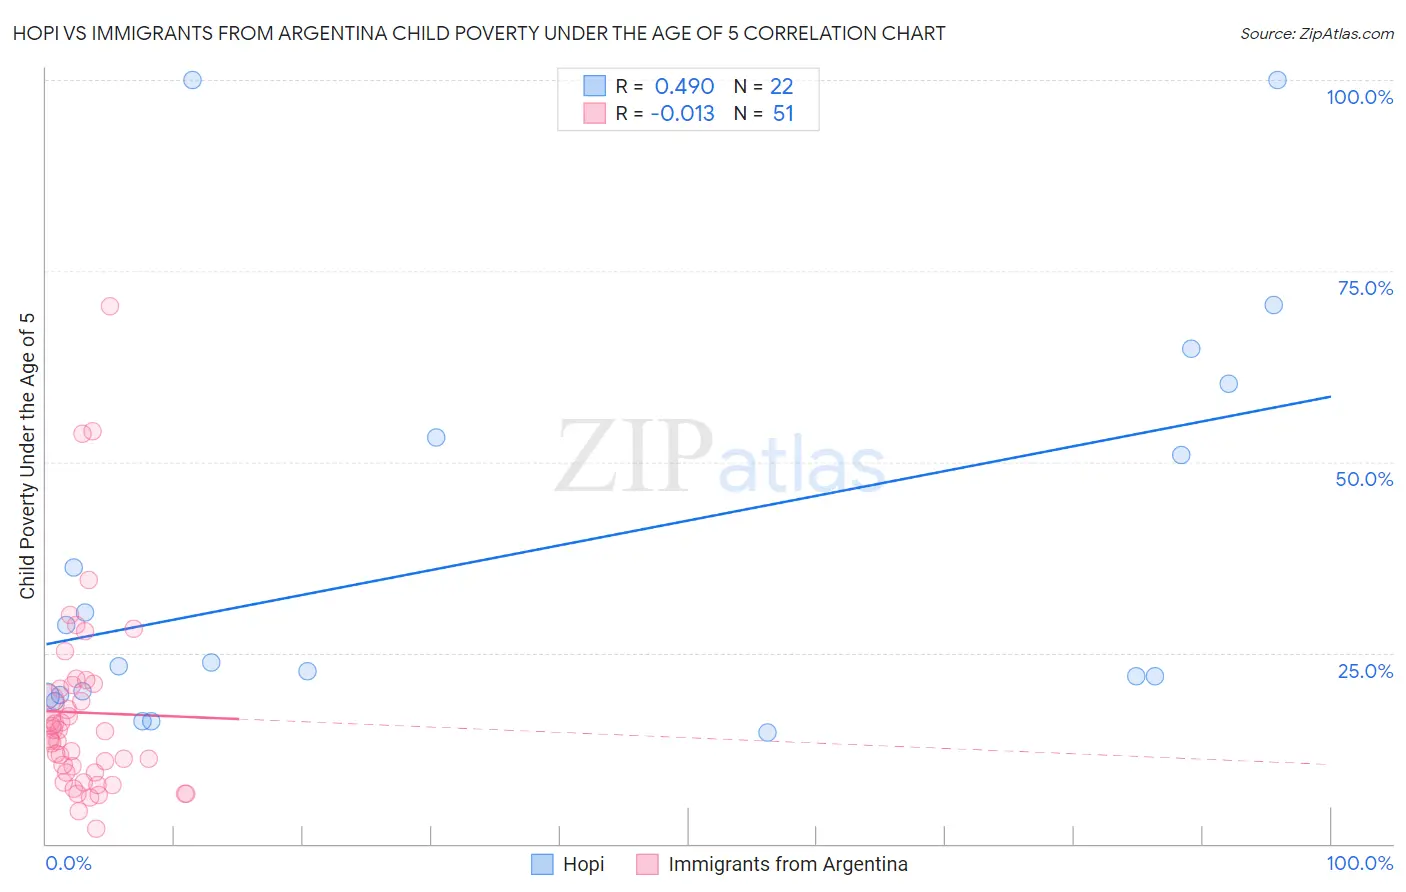 Hopi vs Immigrants from Argentina Child Poverty Under the Age of 5